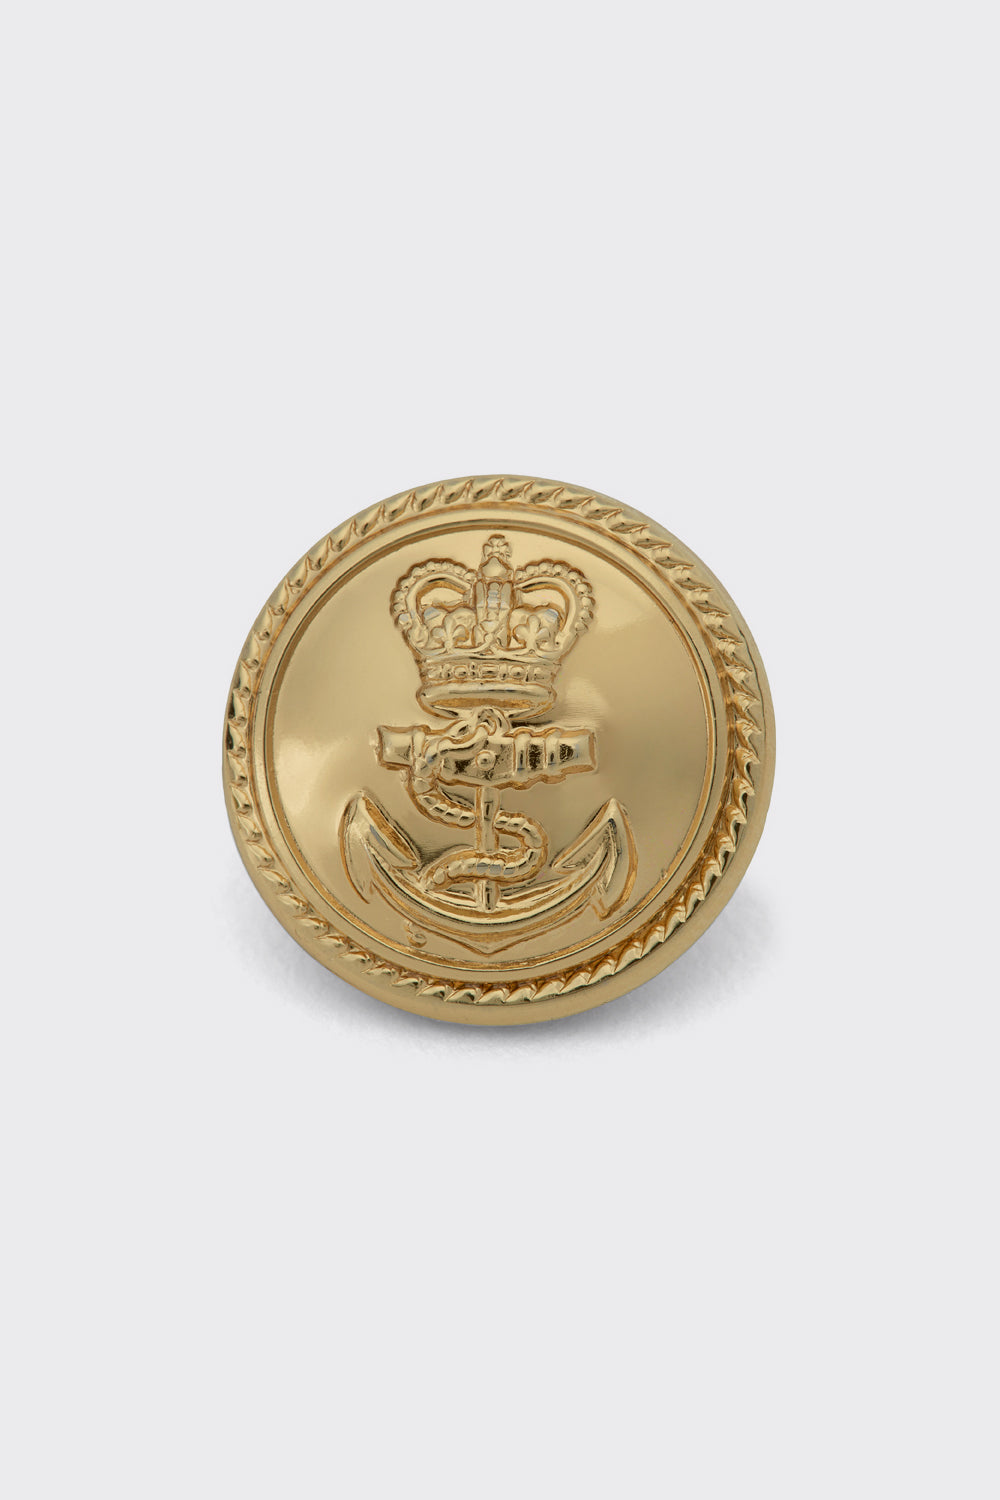 Royal Navy Gold Officers Buttons - St Edwards Crown